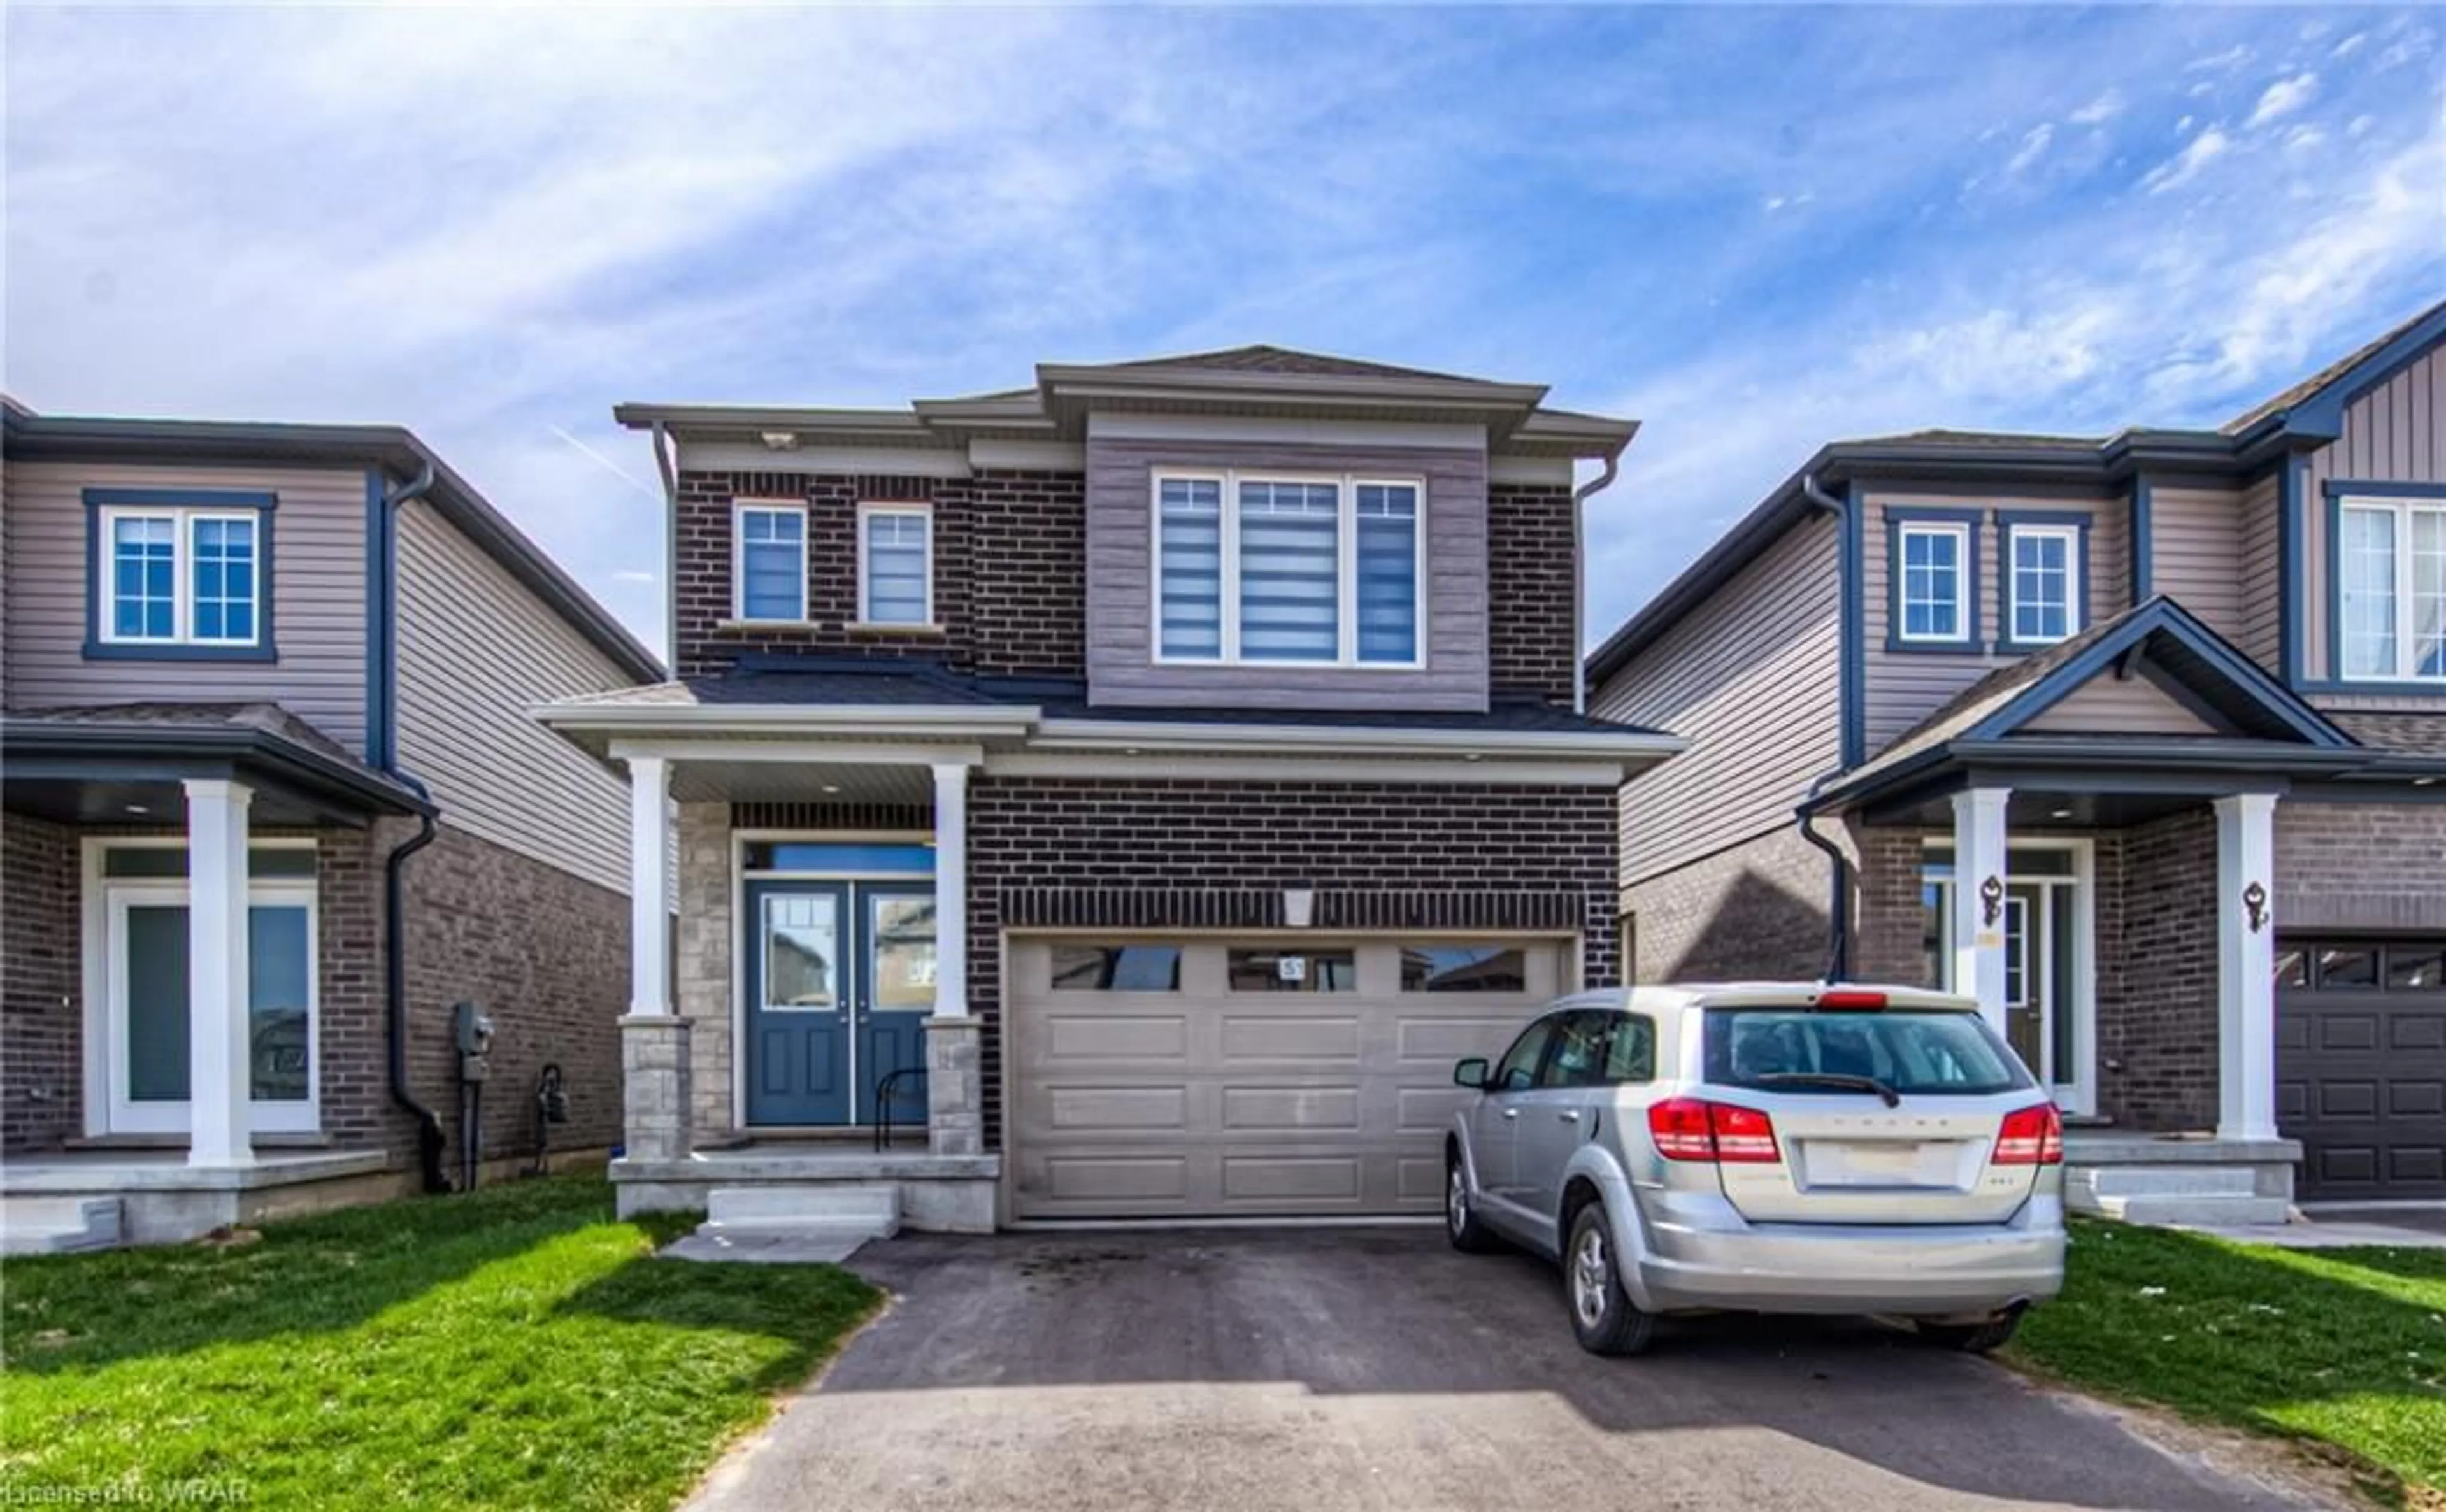 Frontside or backside of a home for 51 Beauchamp Dr, Cambridge Ontario N1S 0A2